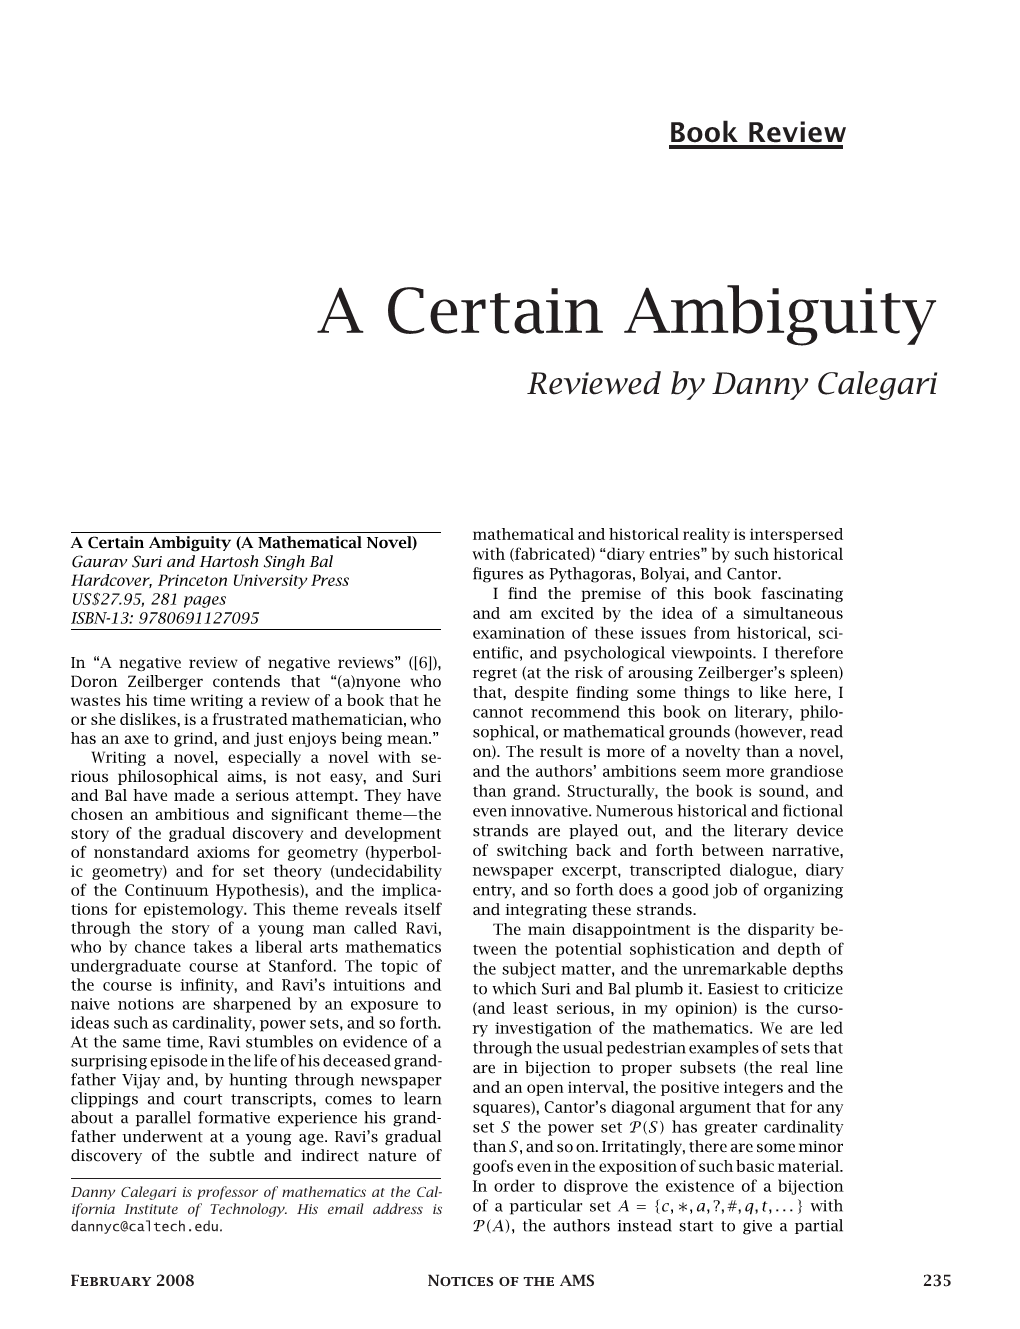 A Certain Ambiguity Reviewed by Danny Calegari